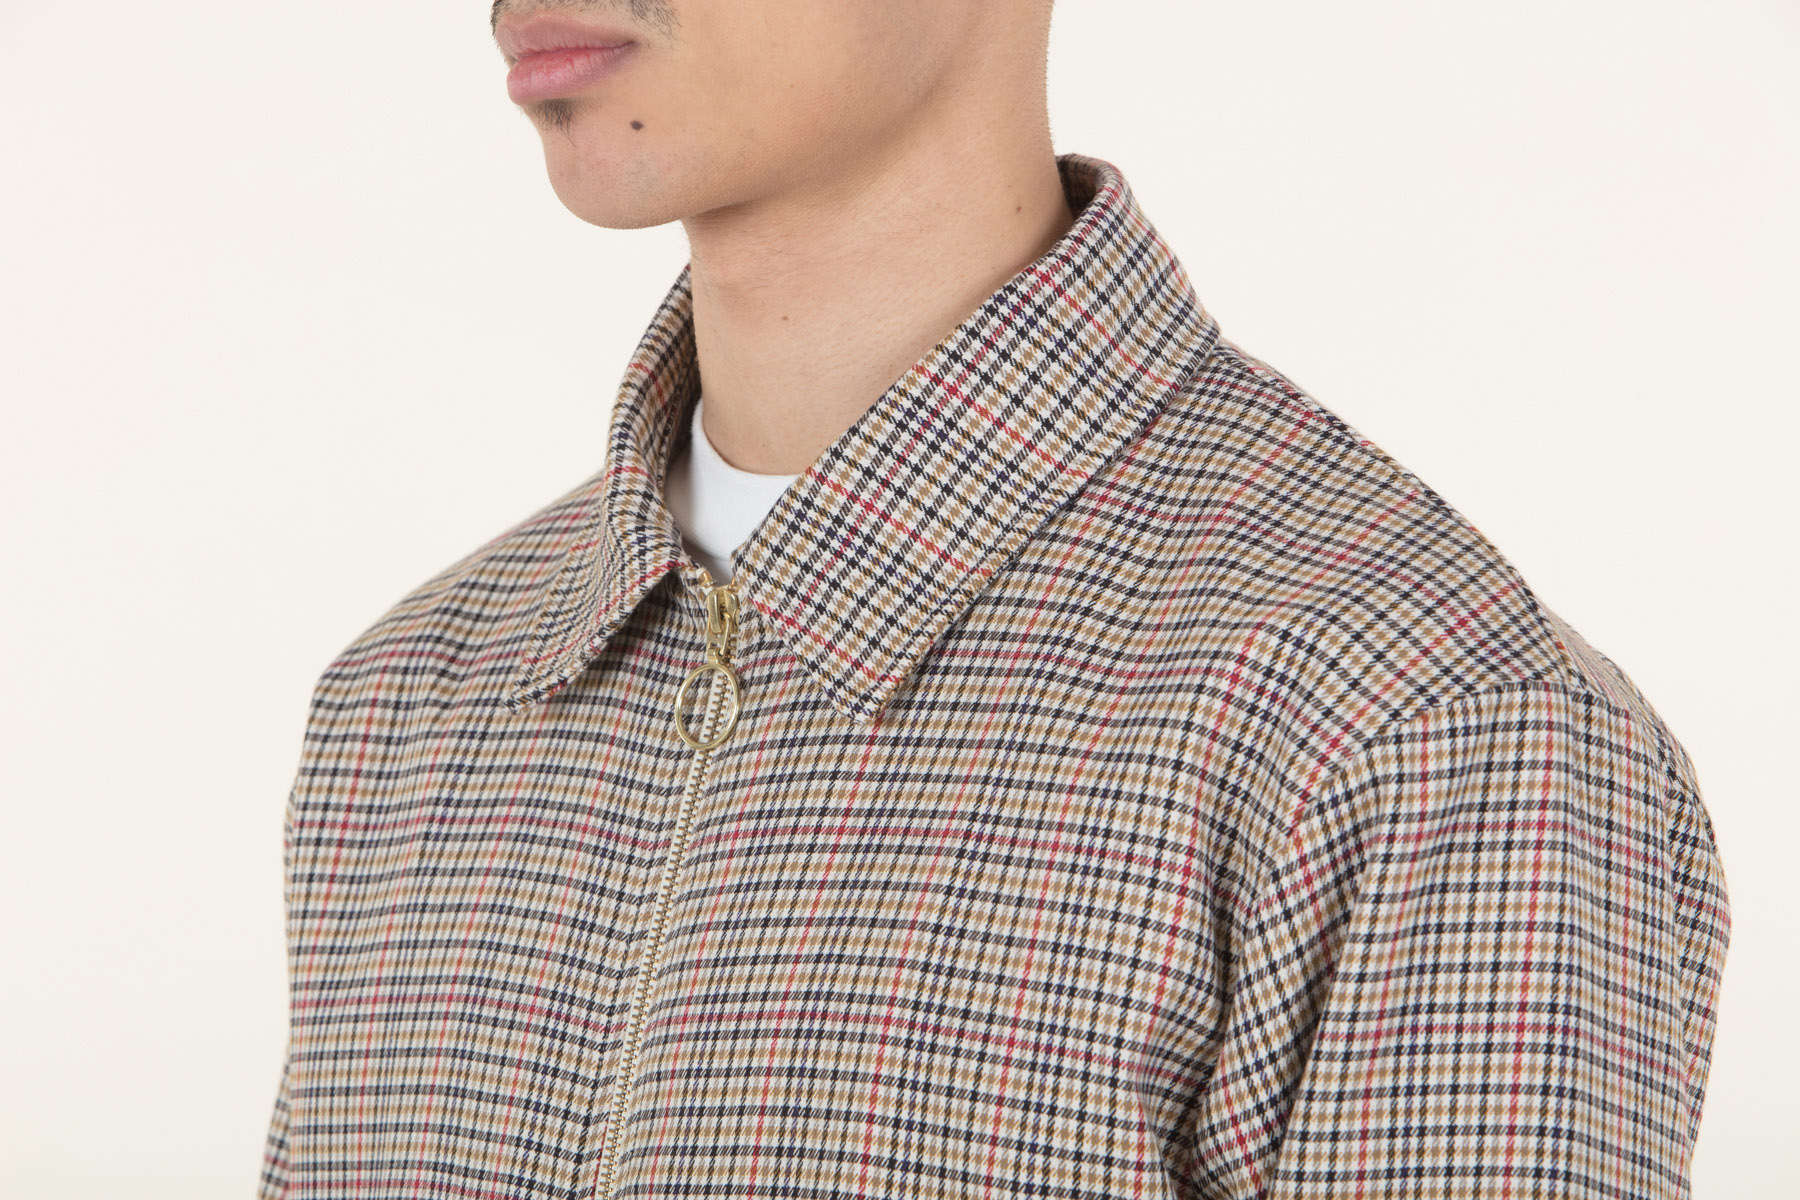 Houndstooth Woven Jacket